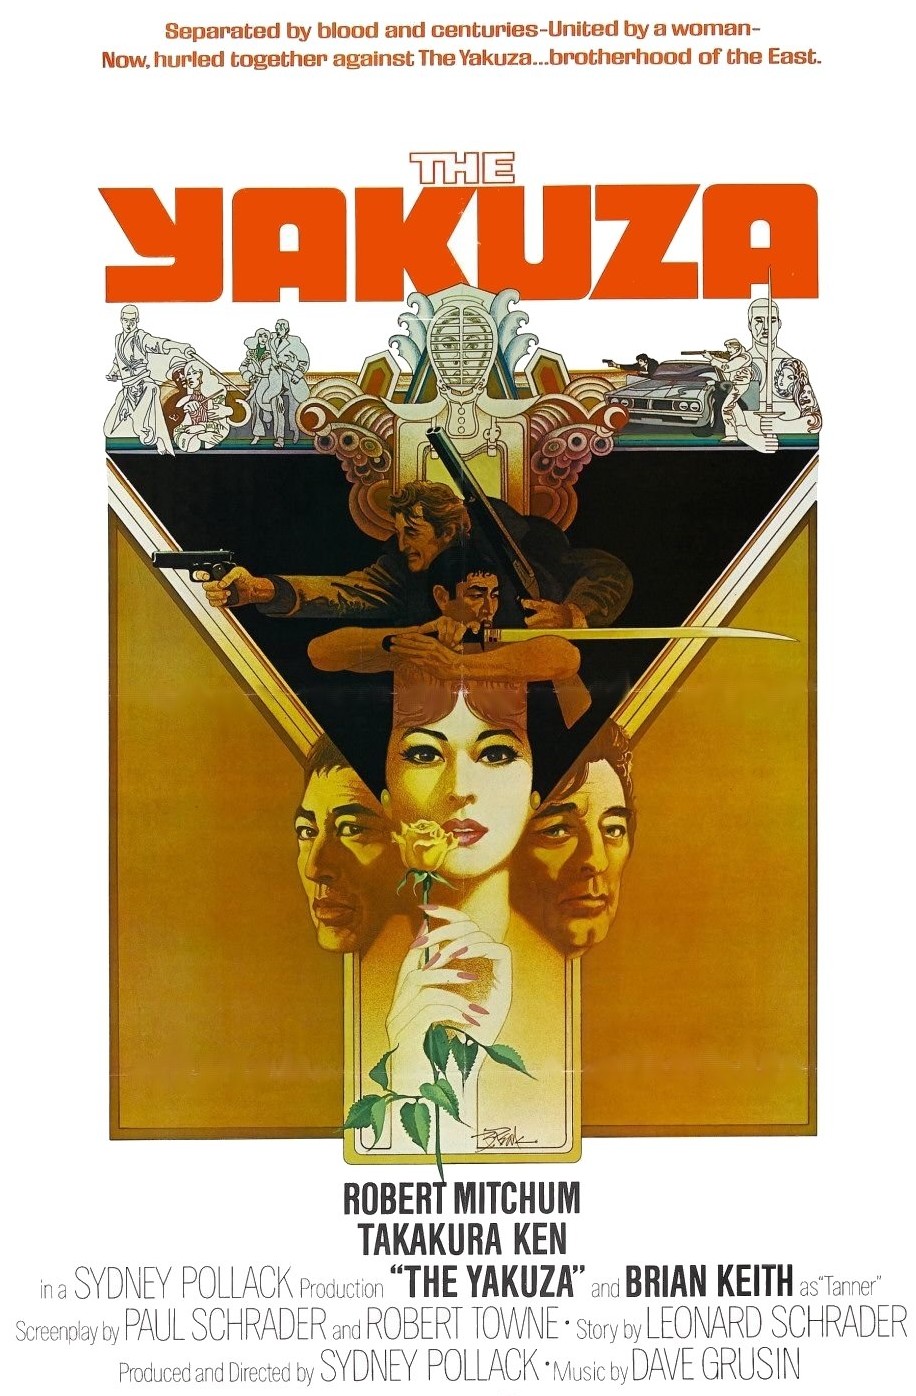 The movie poster for The Yakuza.